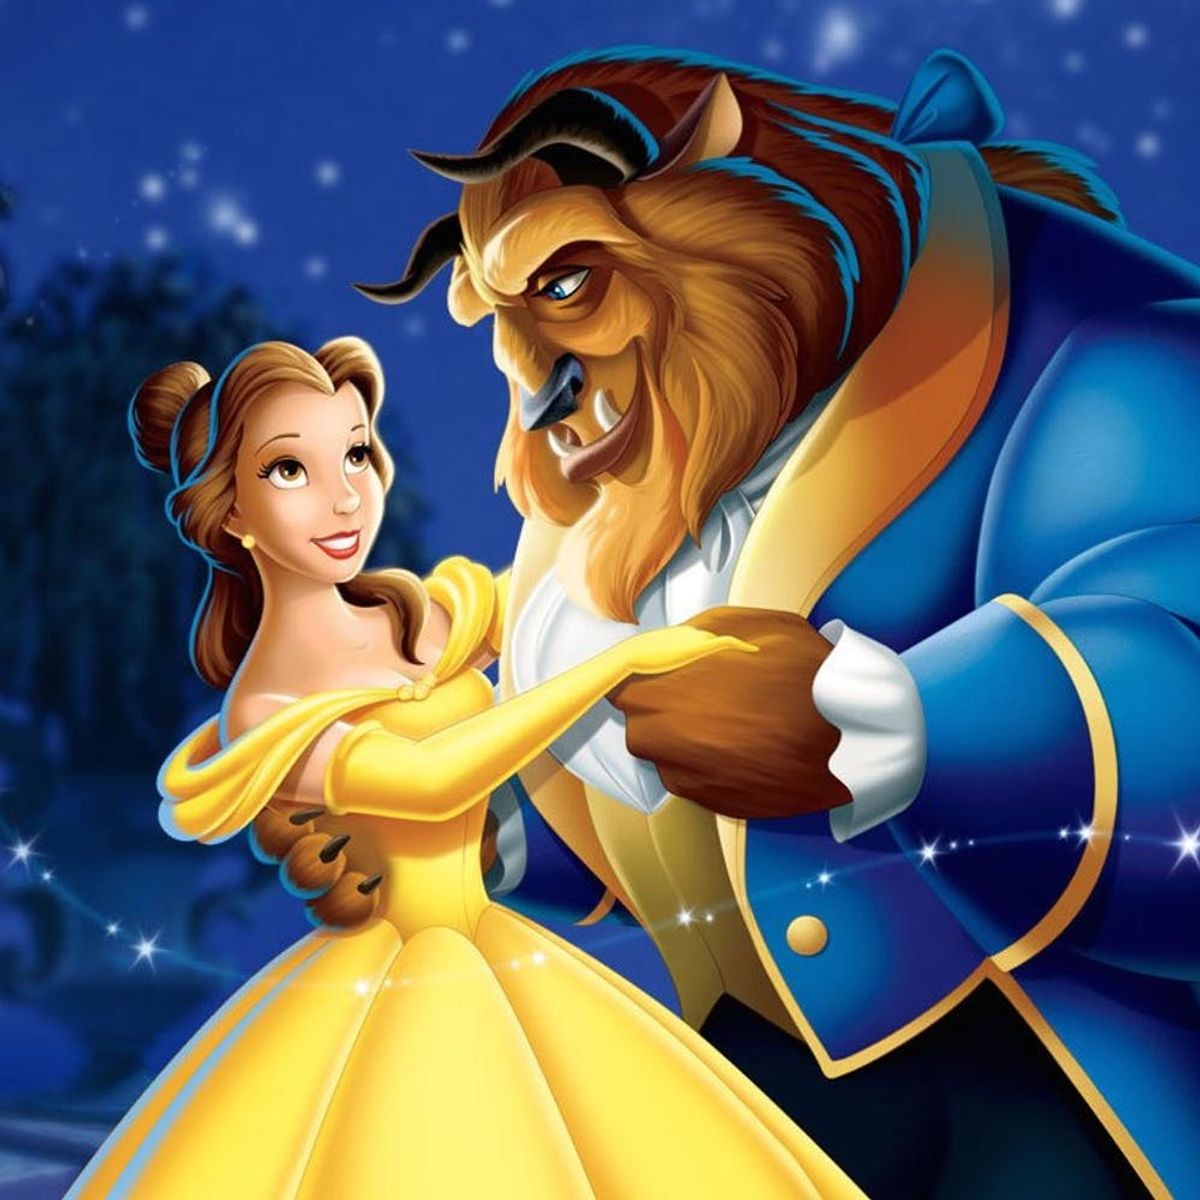 Here’s Your First Look at the Beast With Belle in Disney’s New Live-Action Film